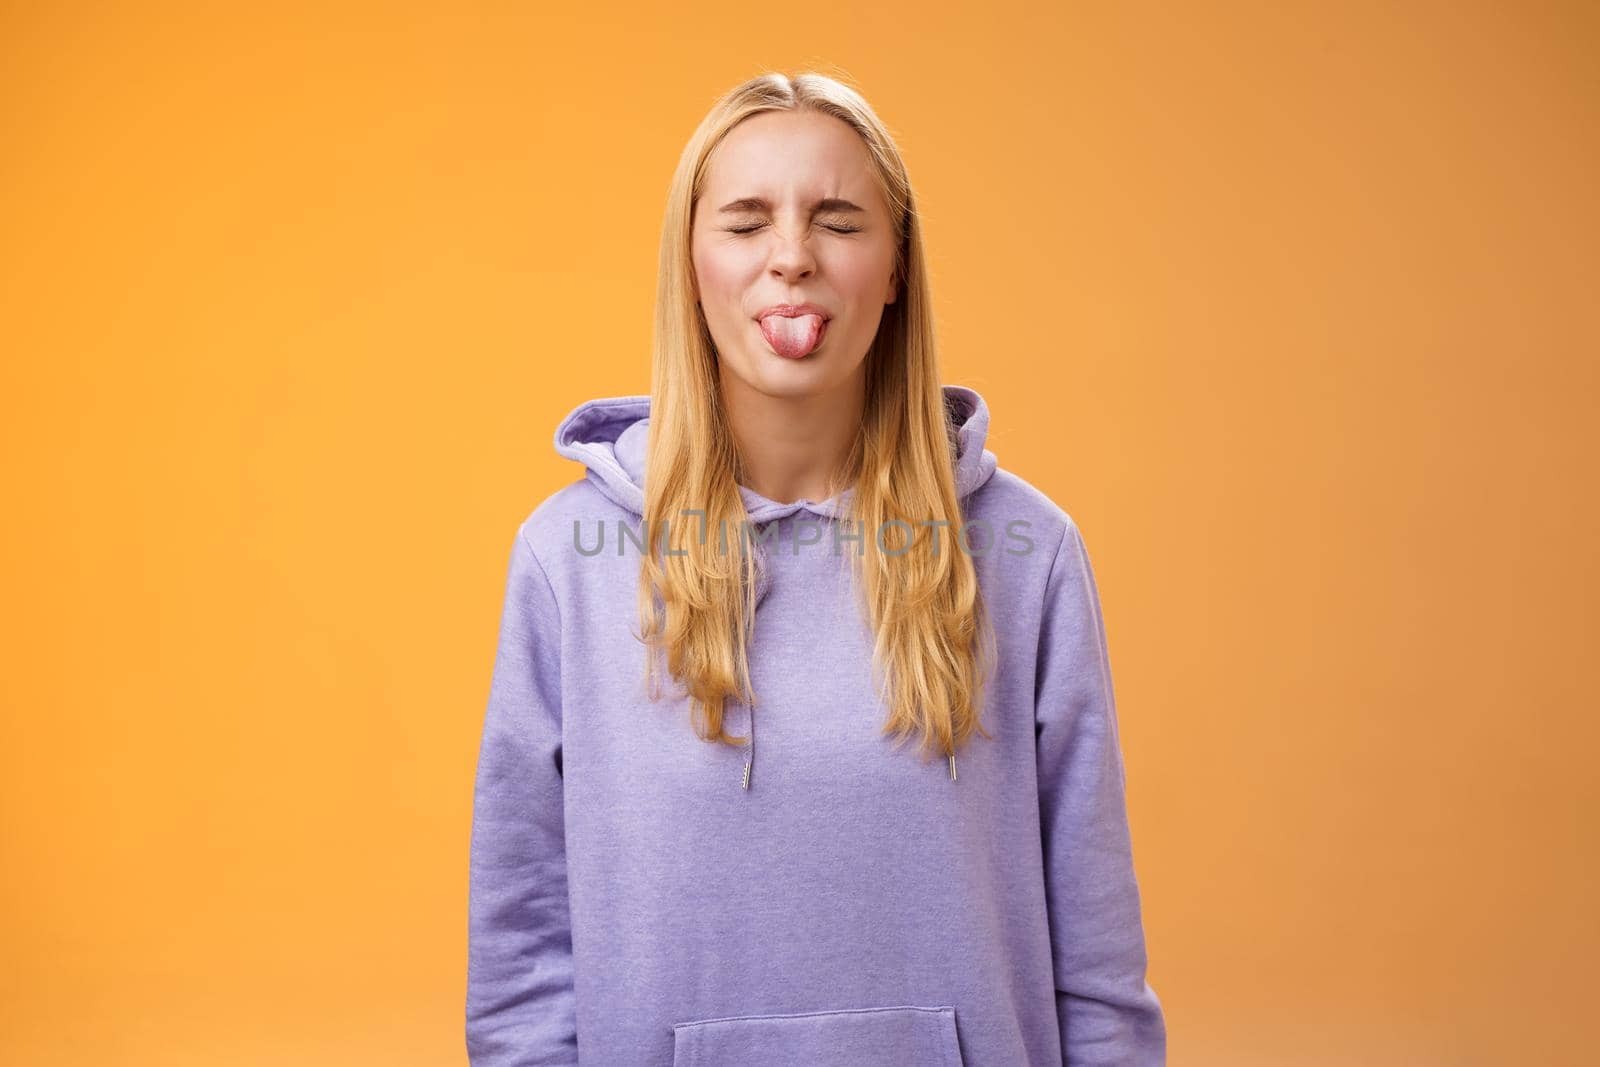 Playful amused charismatic young funny blond girl having fun close eyes showing tongue rebellious fool around unbothered enjoying carefree sunny spring days standing orange background.